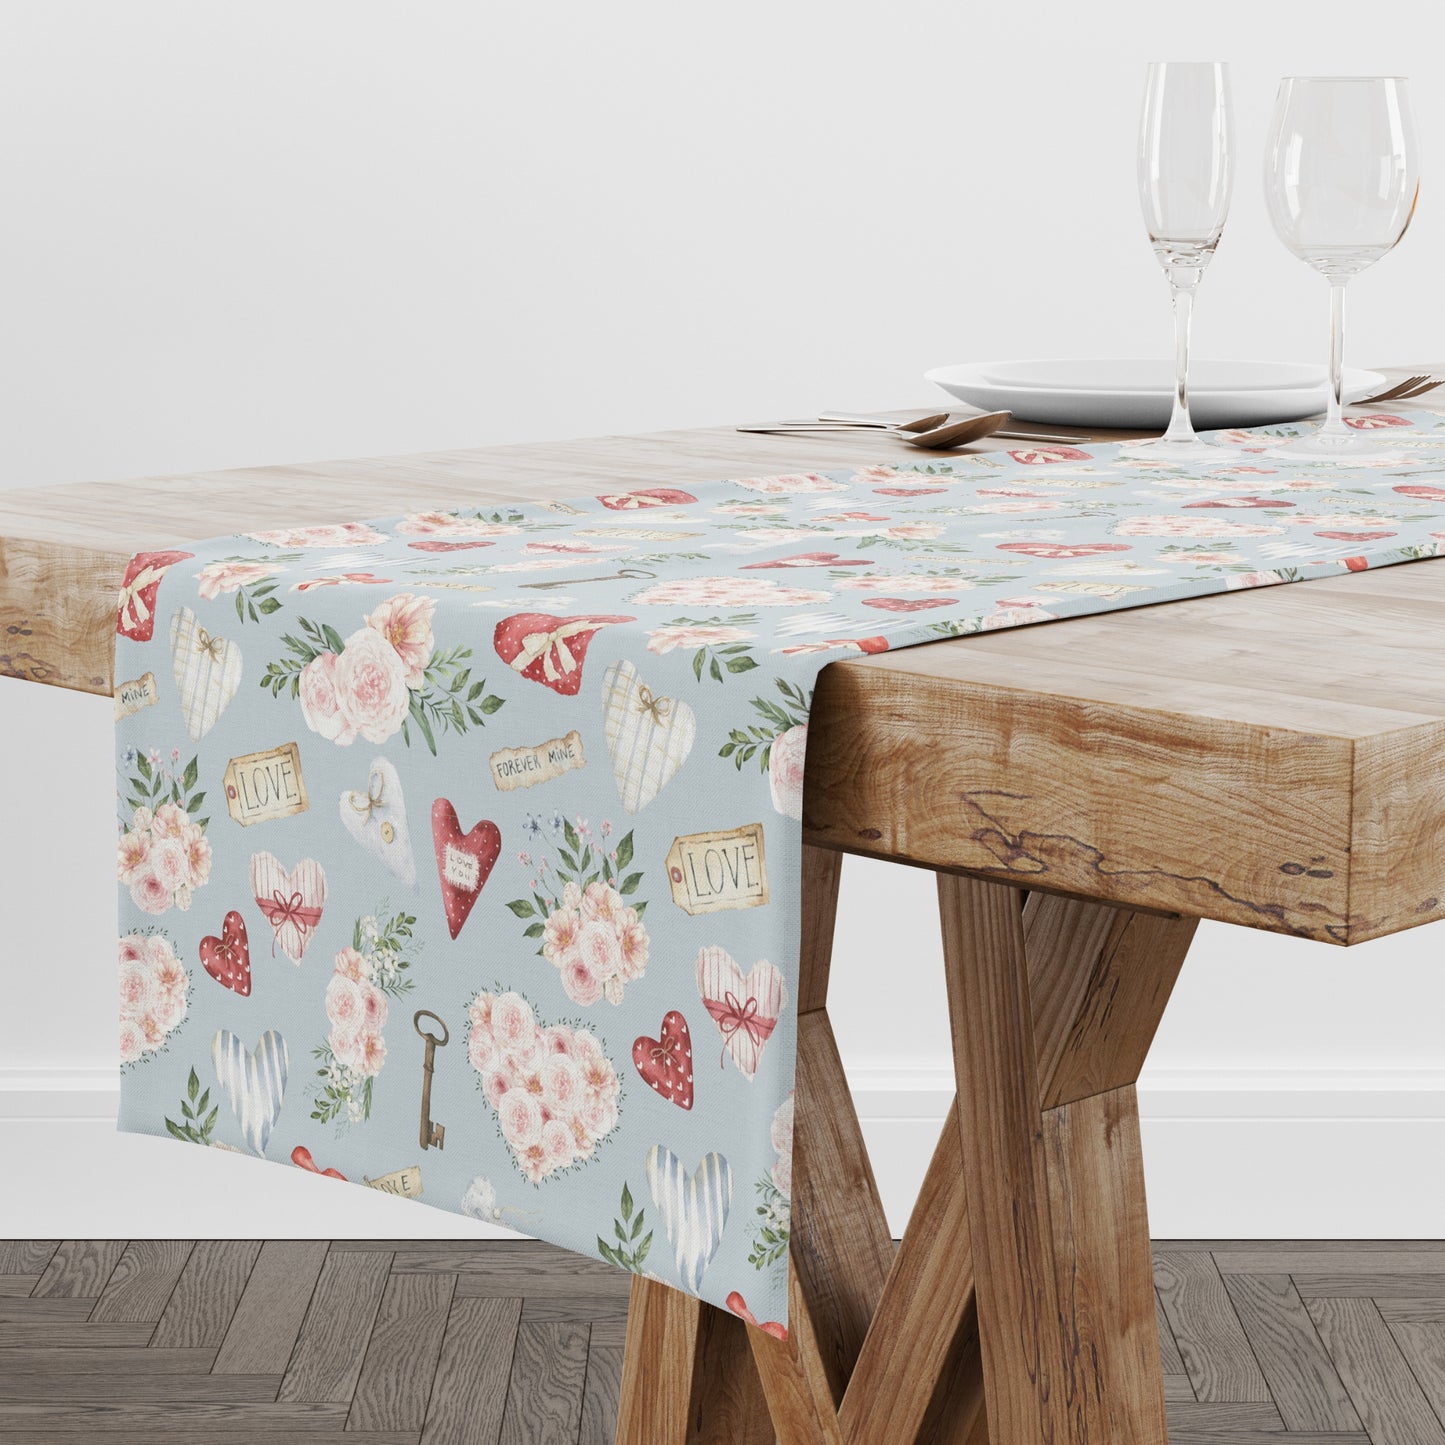 a wooden table with a table cloth on it